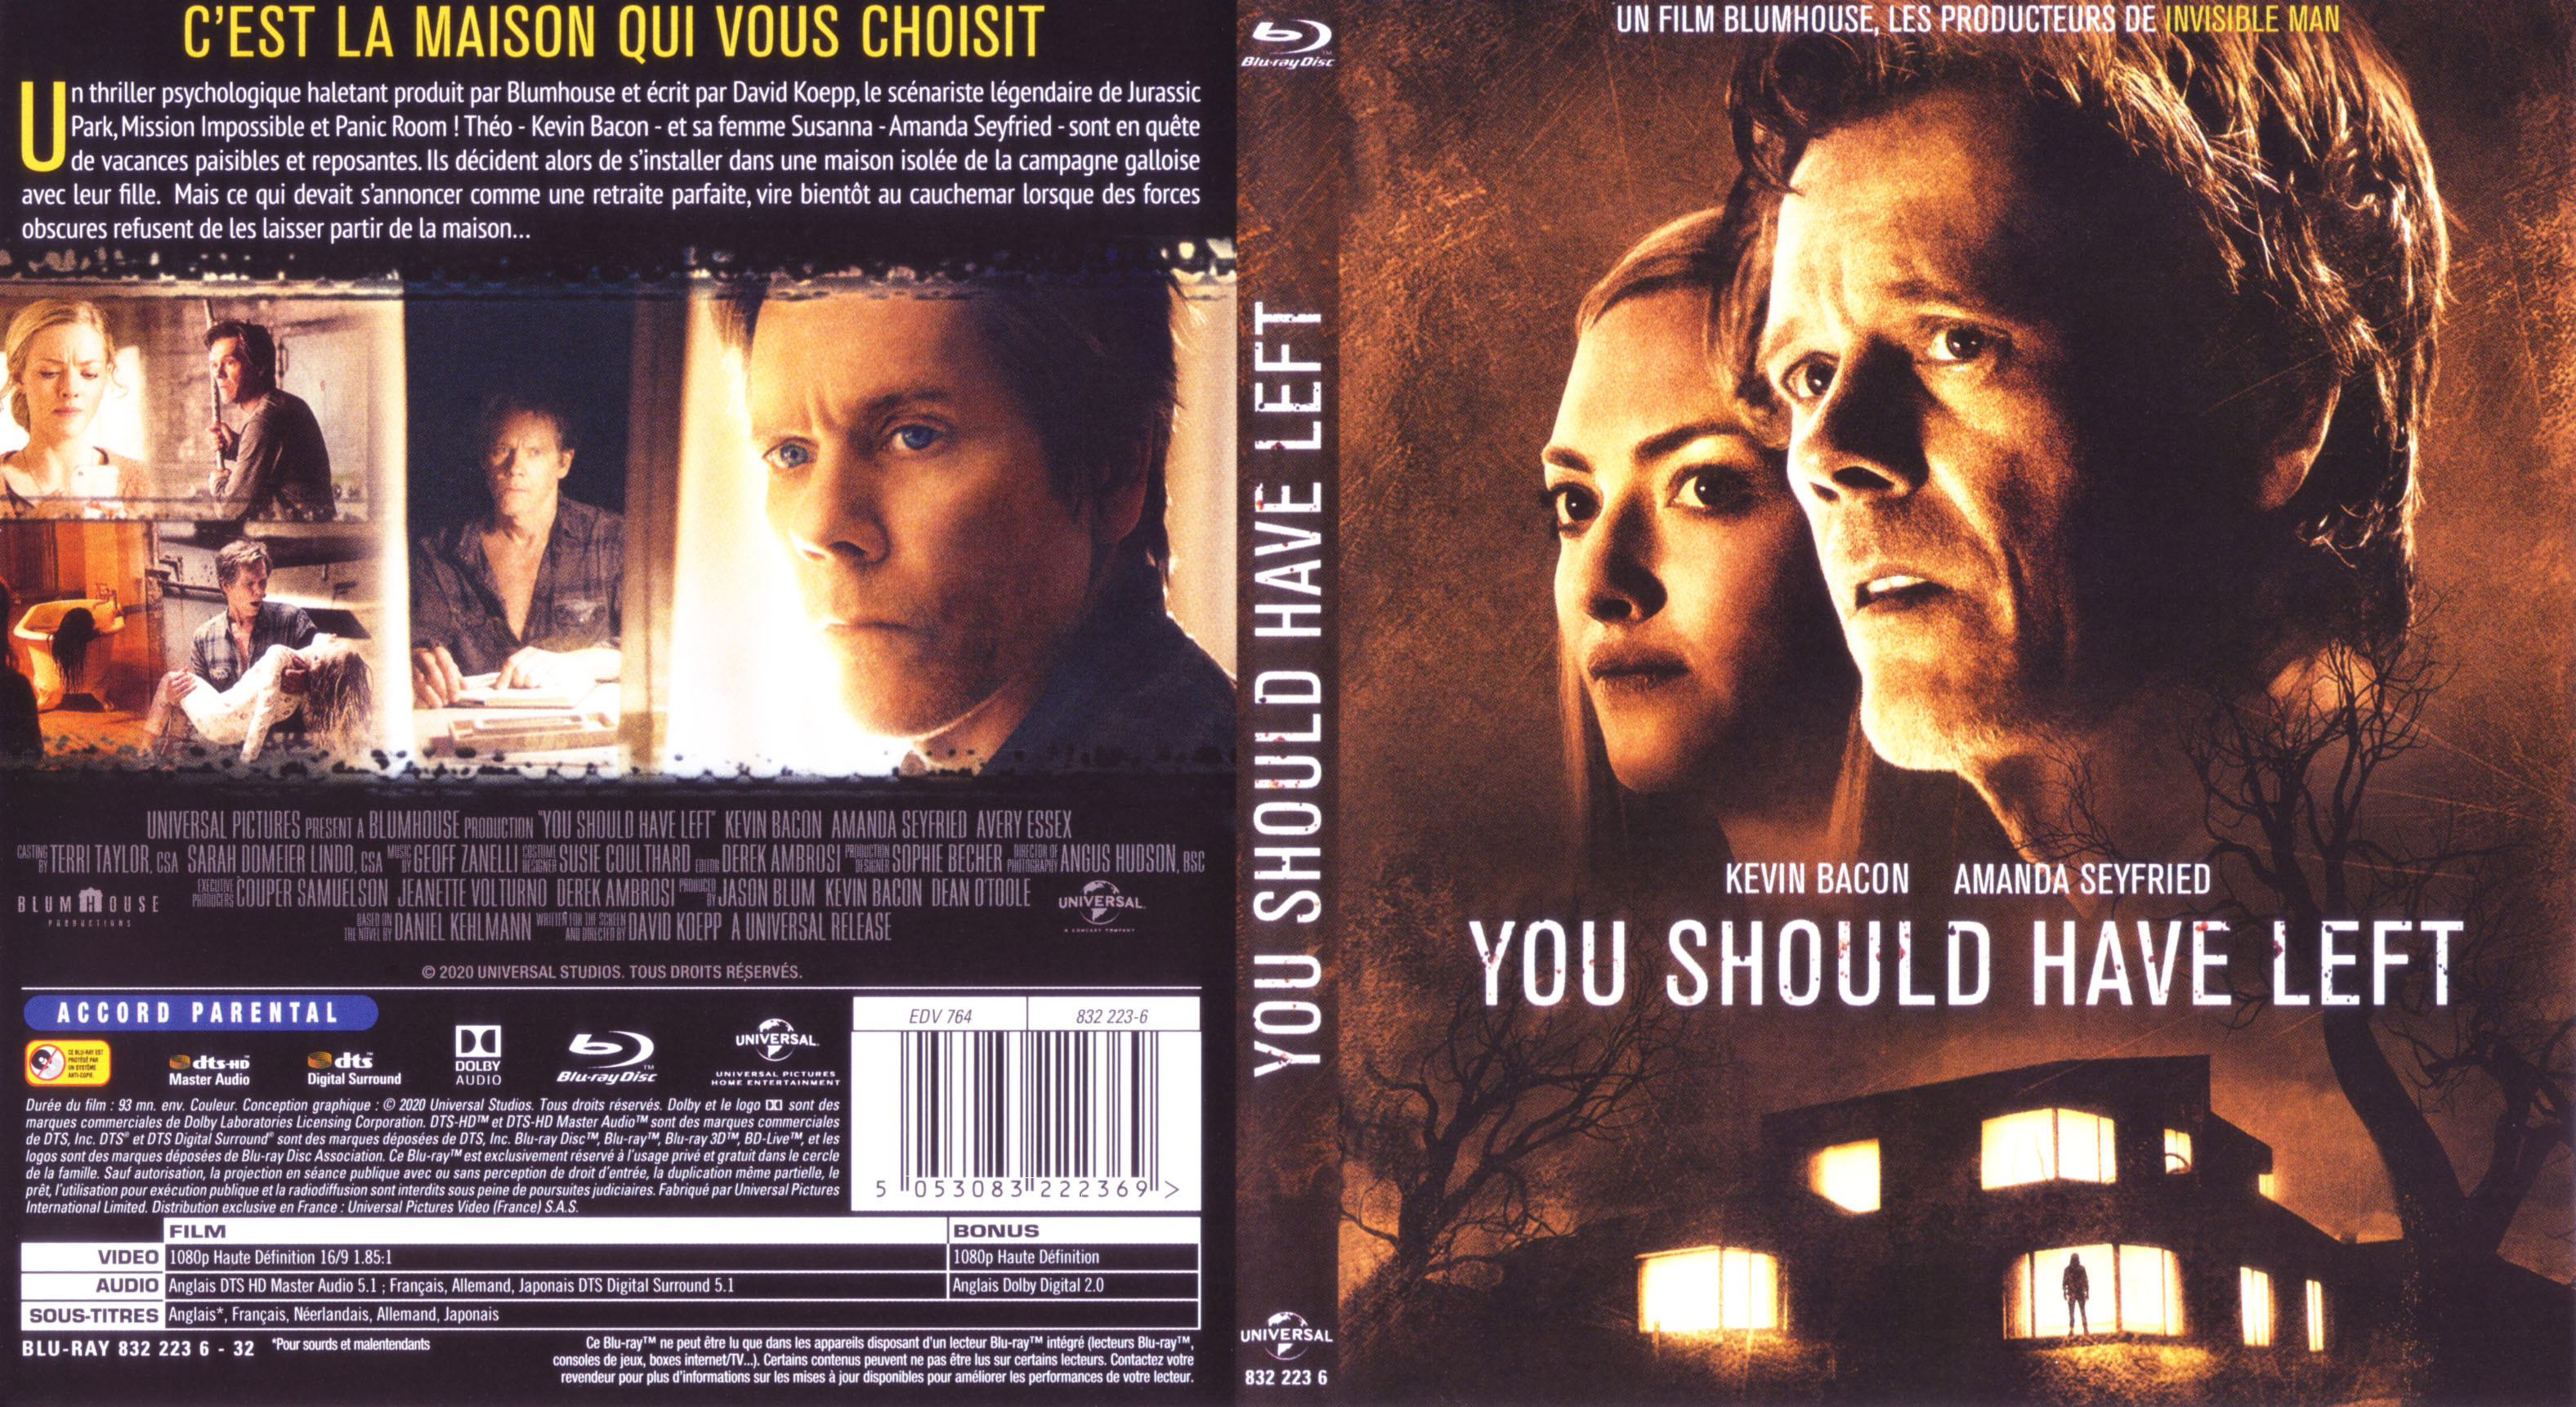 Jaquette DVD You should have left (BLU-RAY)